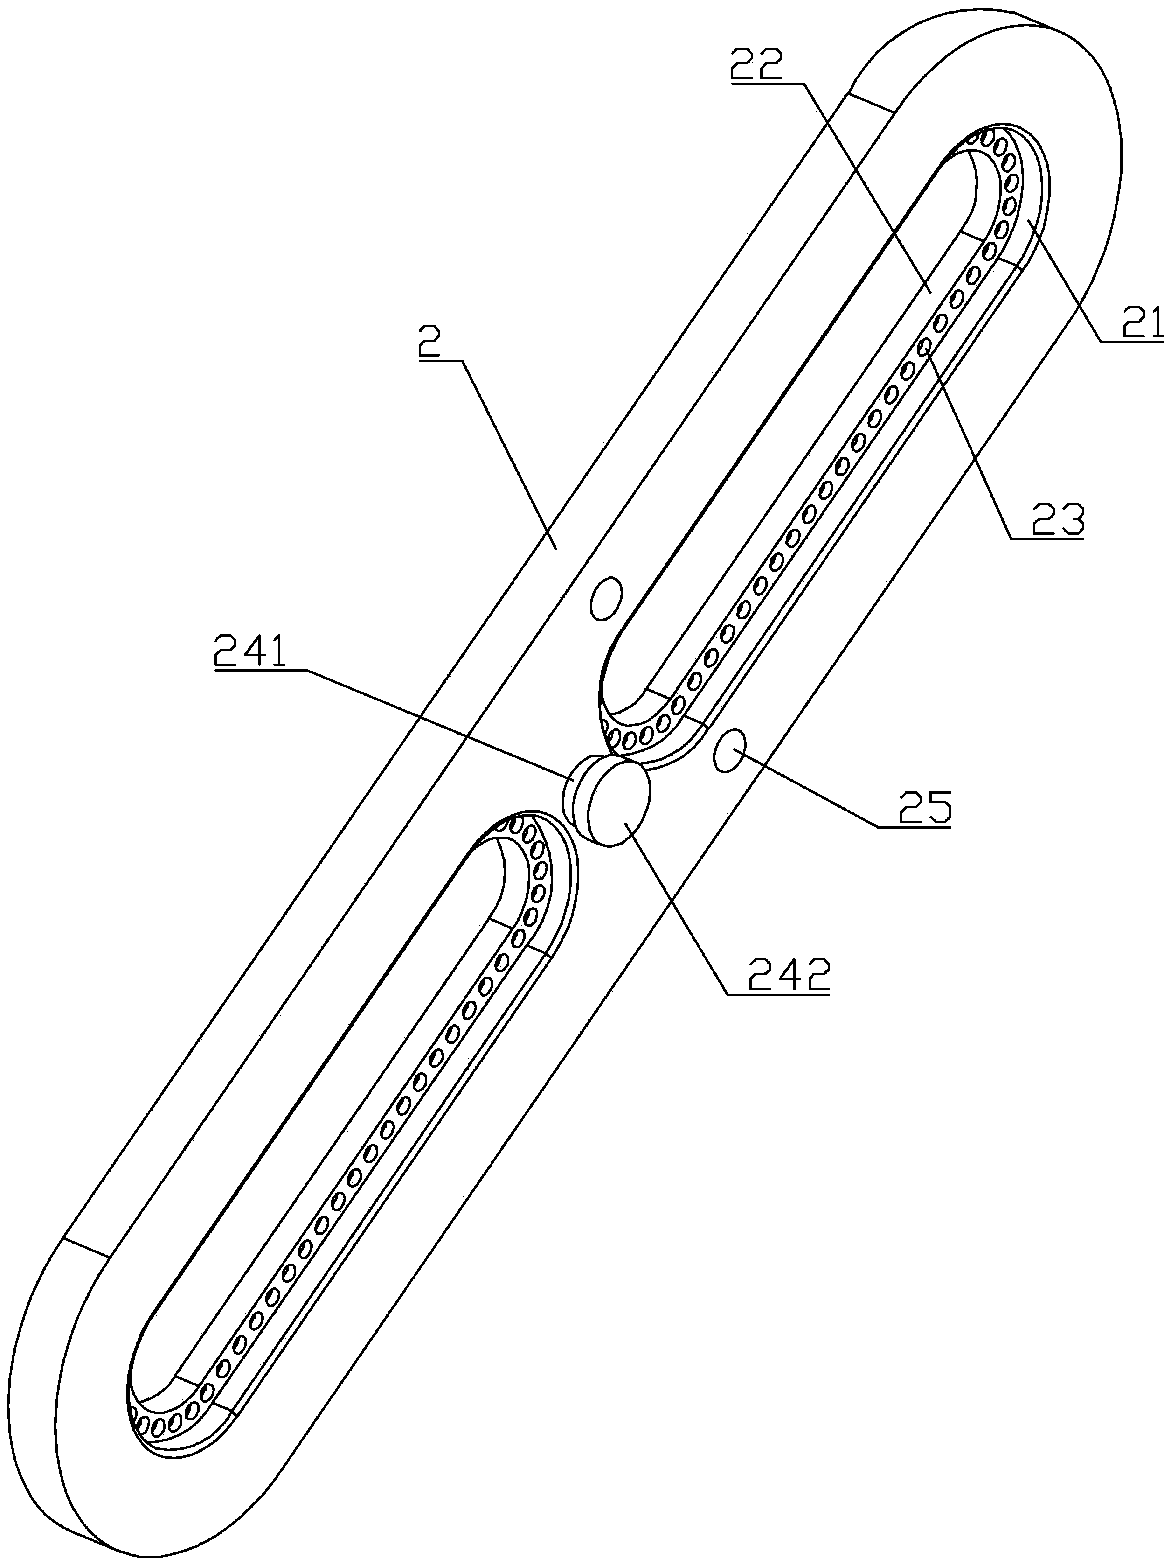 Temporary mandible external fixed support applied in wartime or field environment and using method of external fixed support